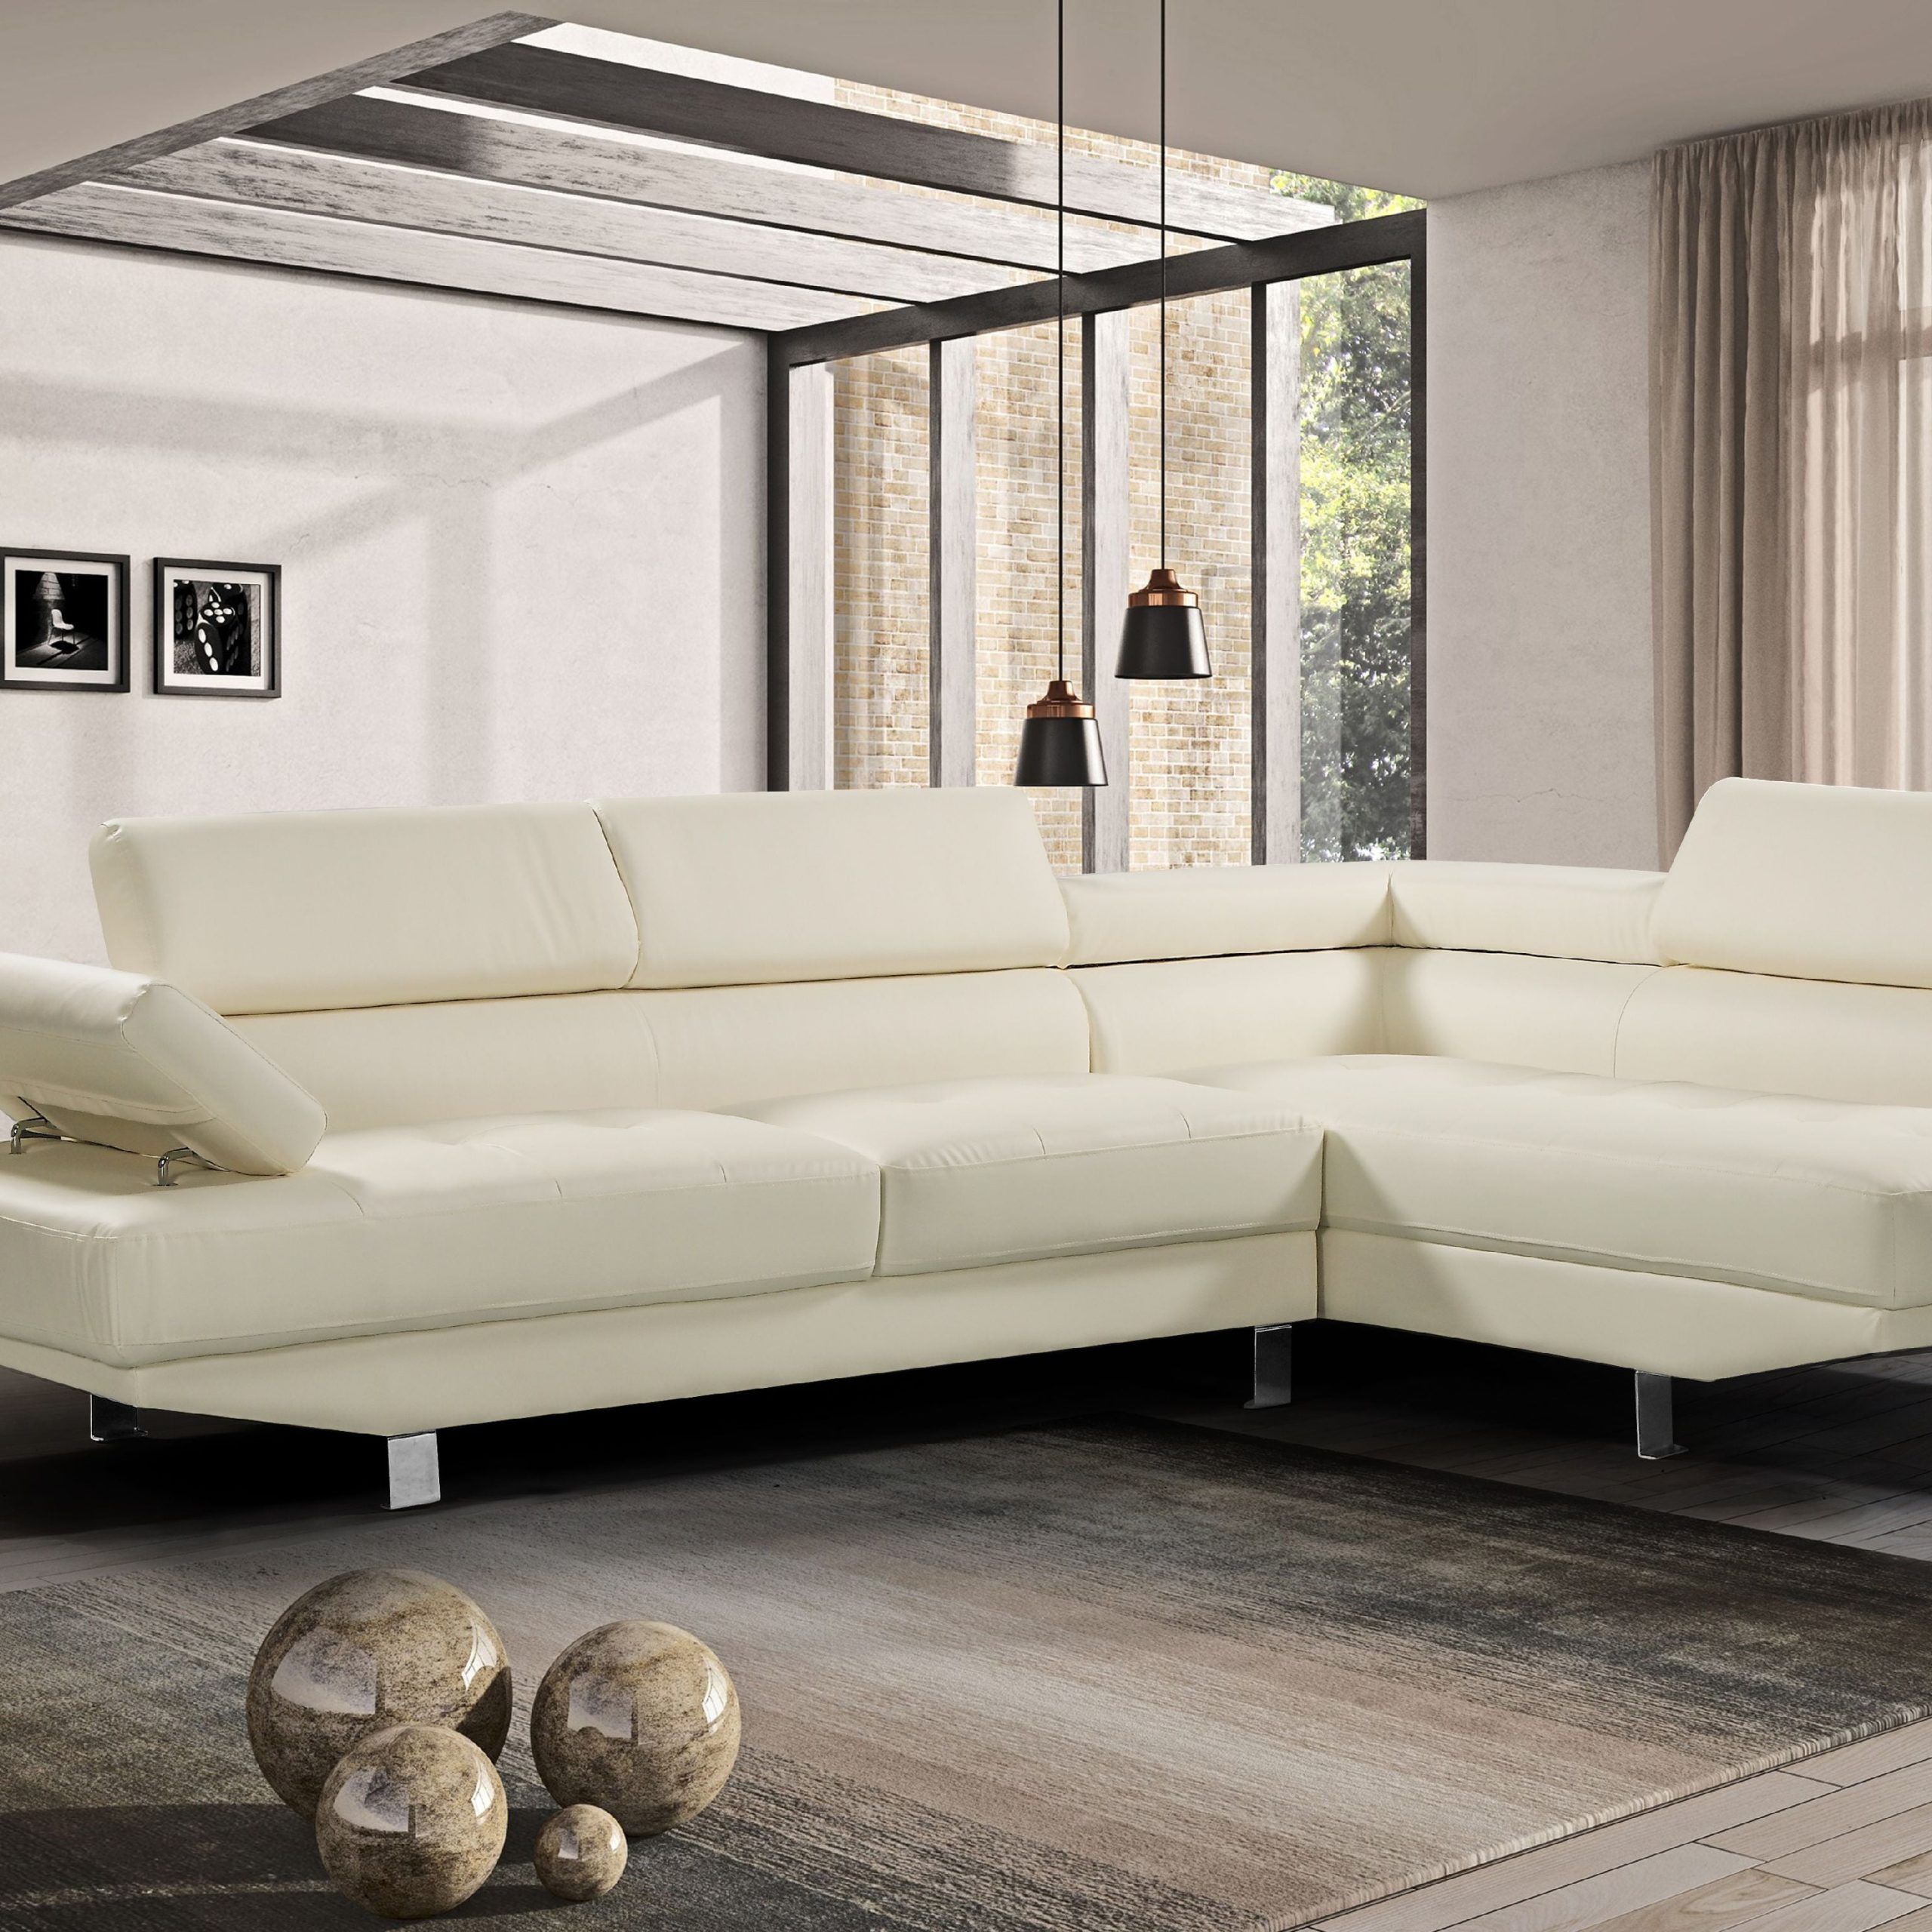 Harper&bright Designs Modern Faux Leather Sectional Sofa With Regarding Faux Leather Sofas (Gallery 11 of 21)